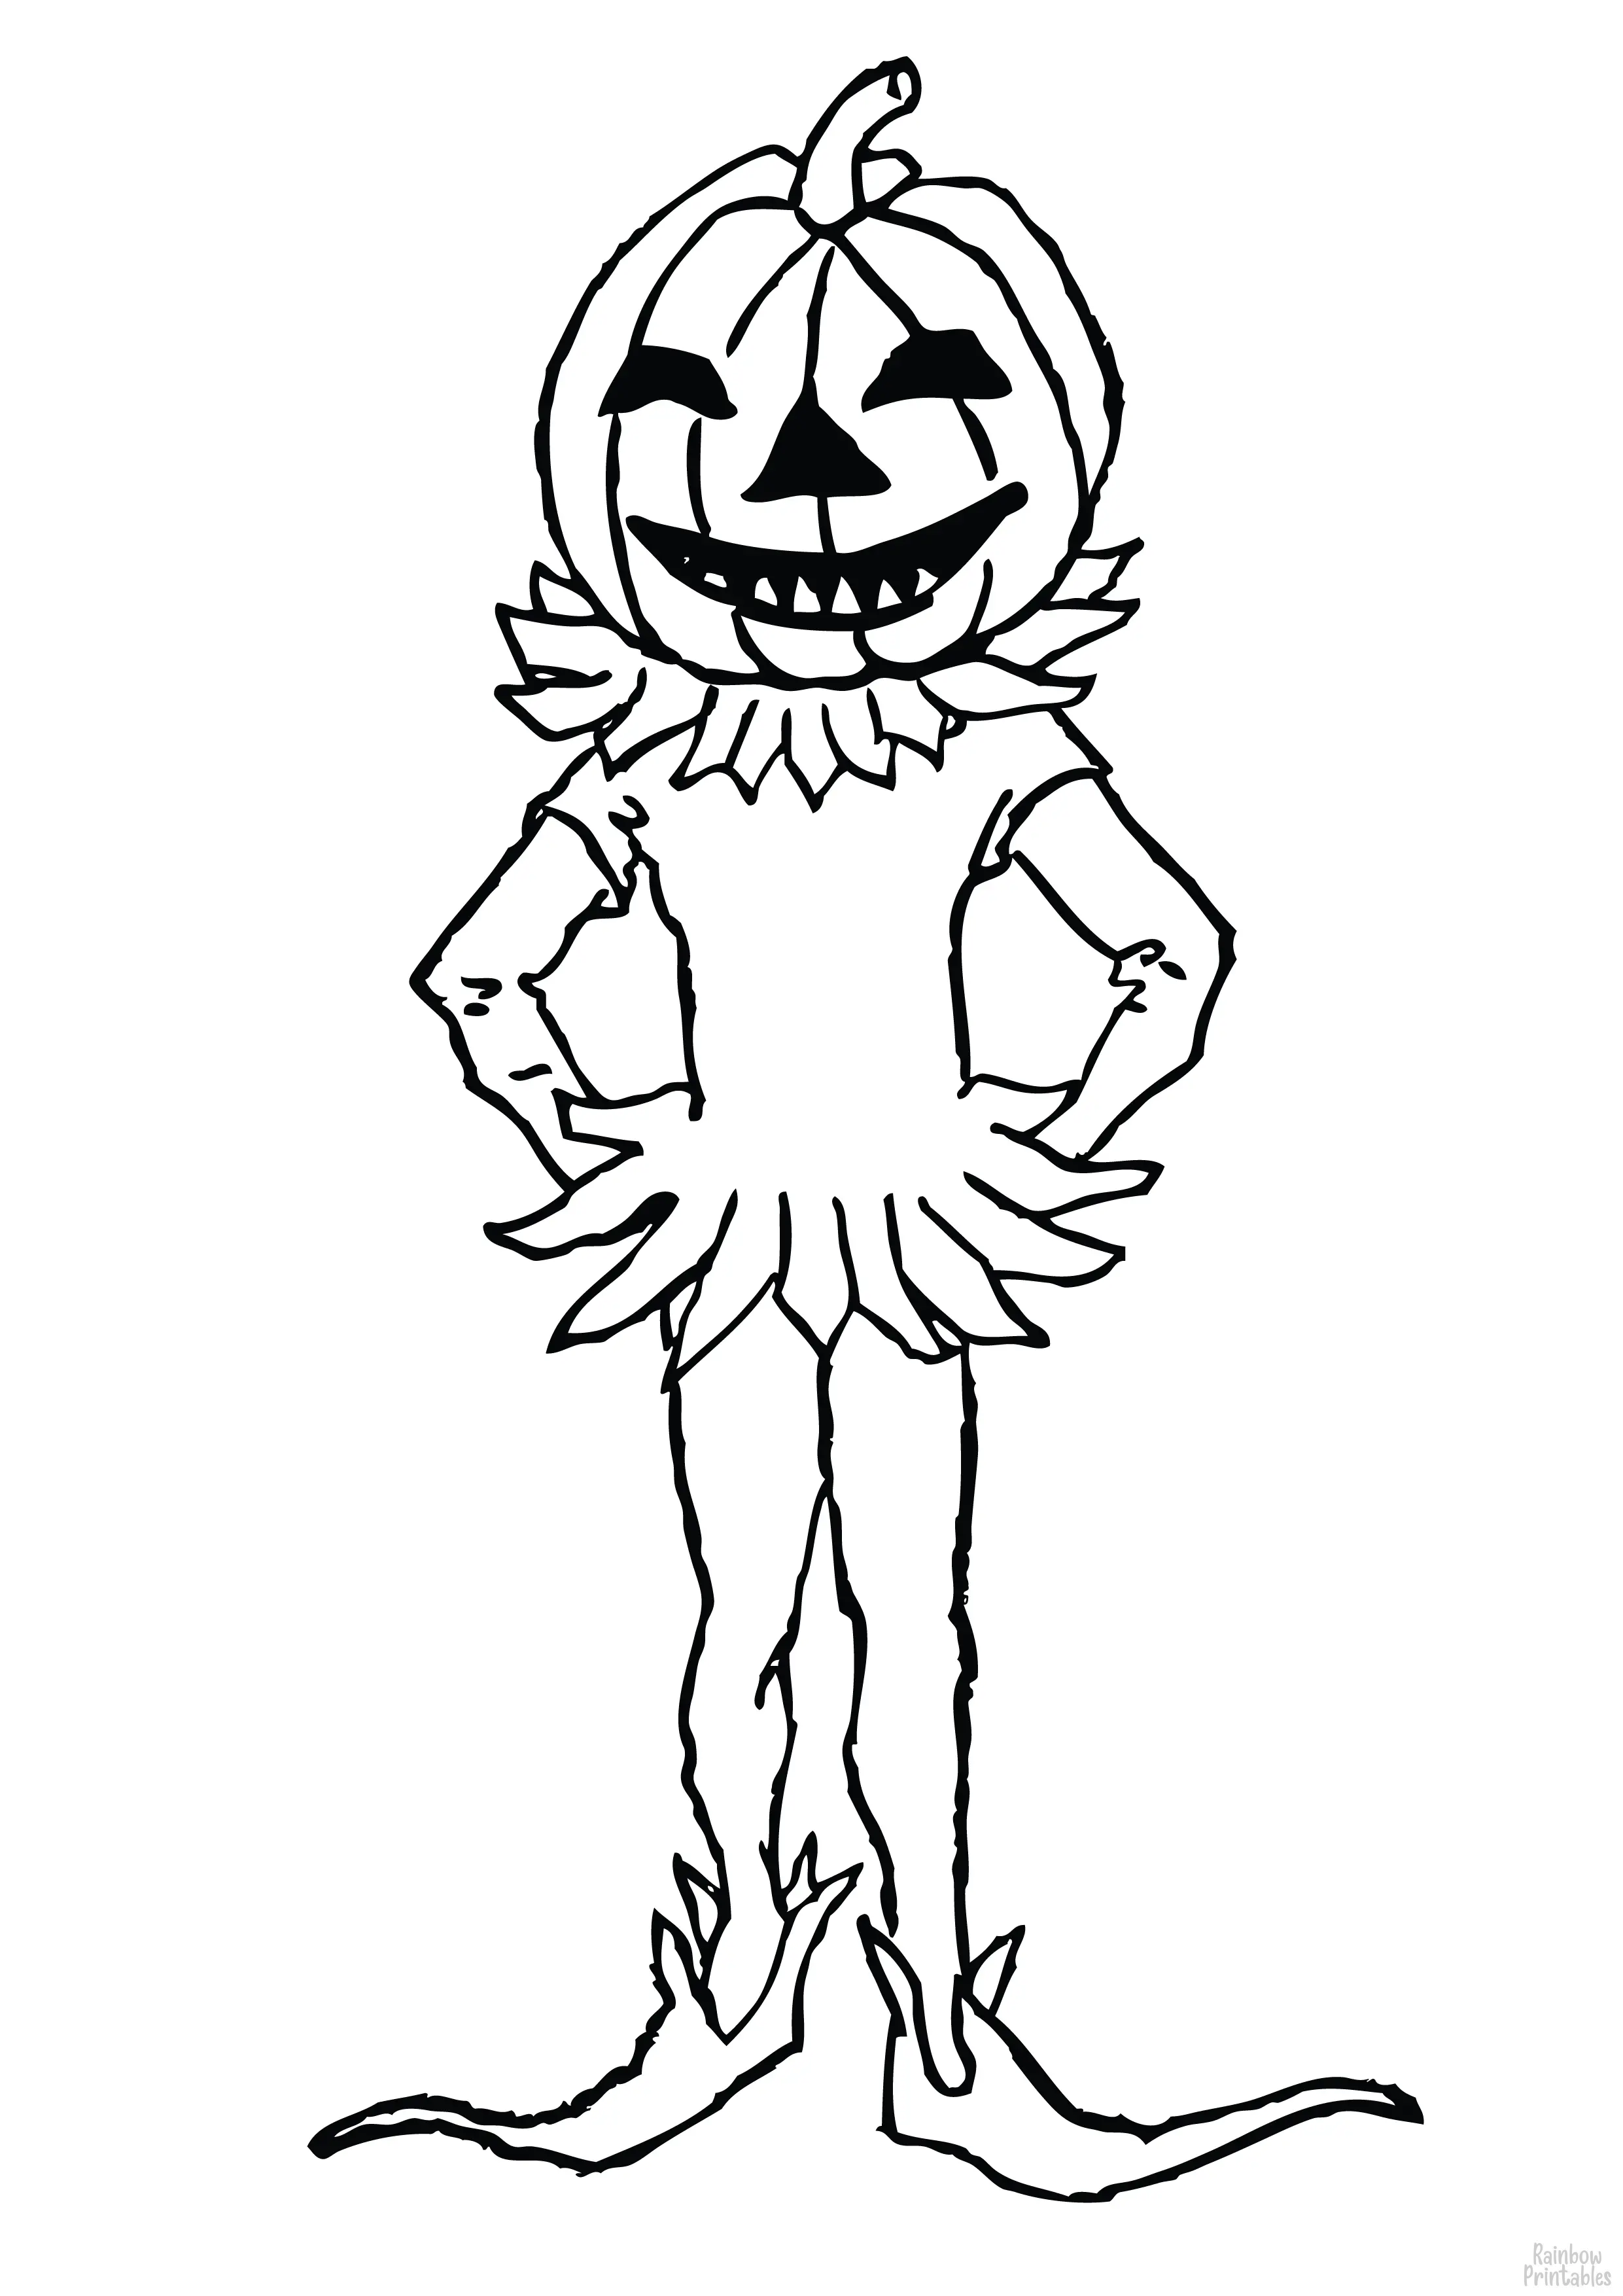 JACK IN THE LATERN Halloween Line Art Drawing Set Free Activity Coloring Pages for Kids